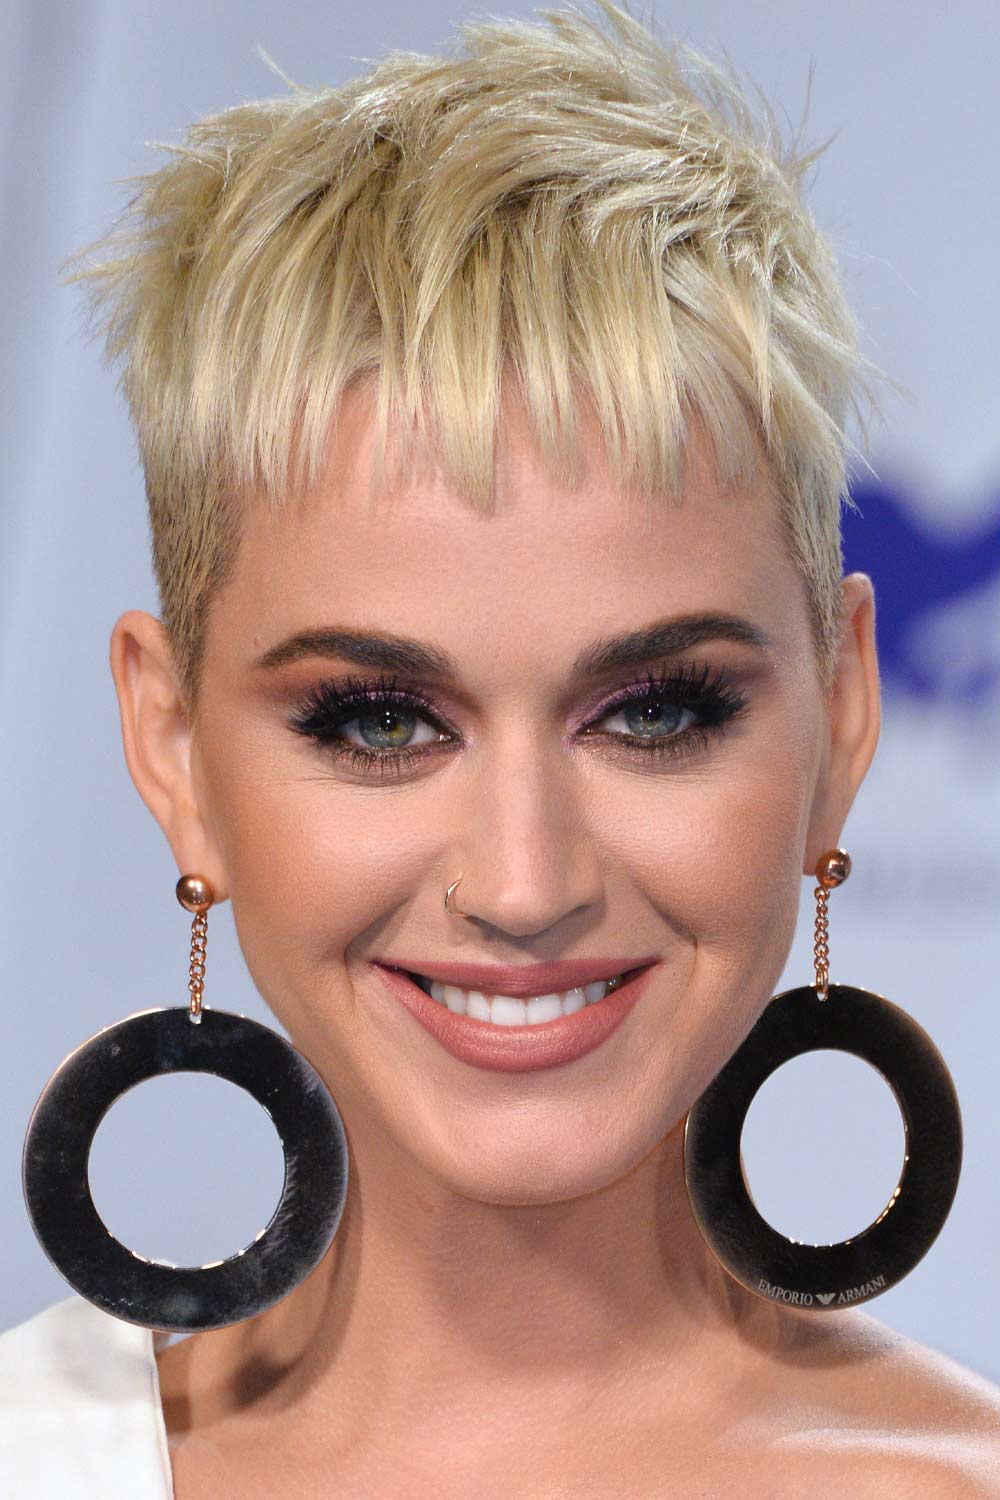 Katy Perry with Blonde Pixie Cut